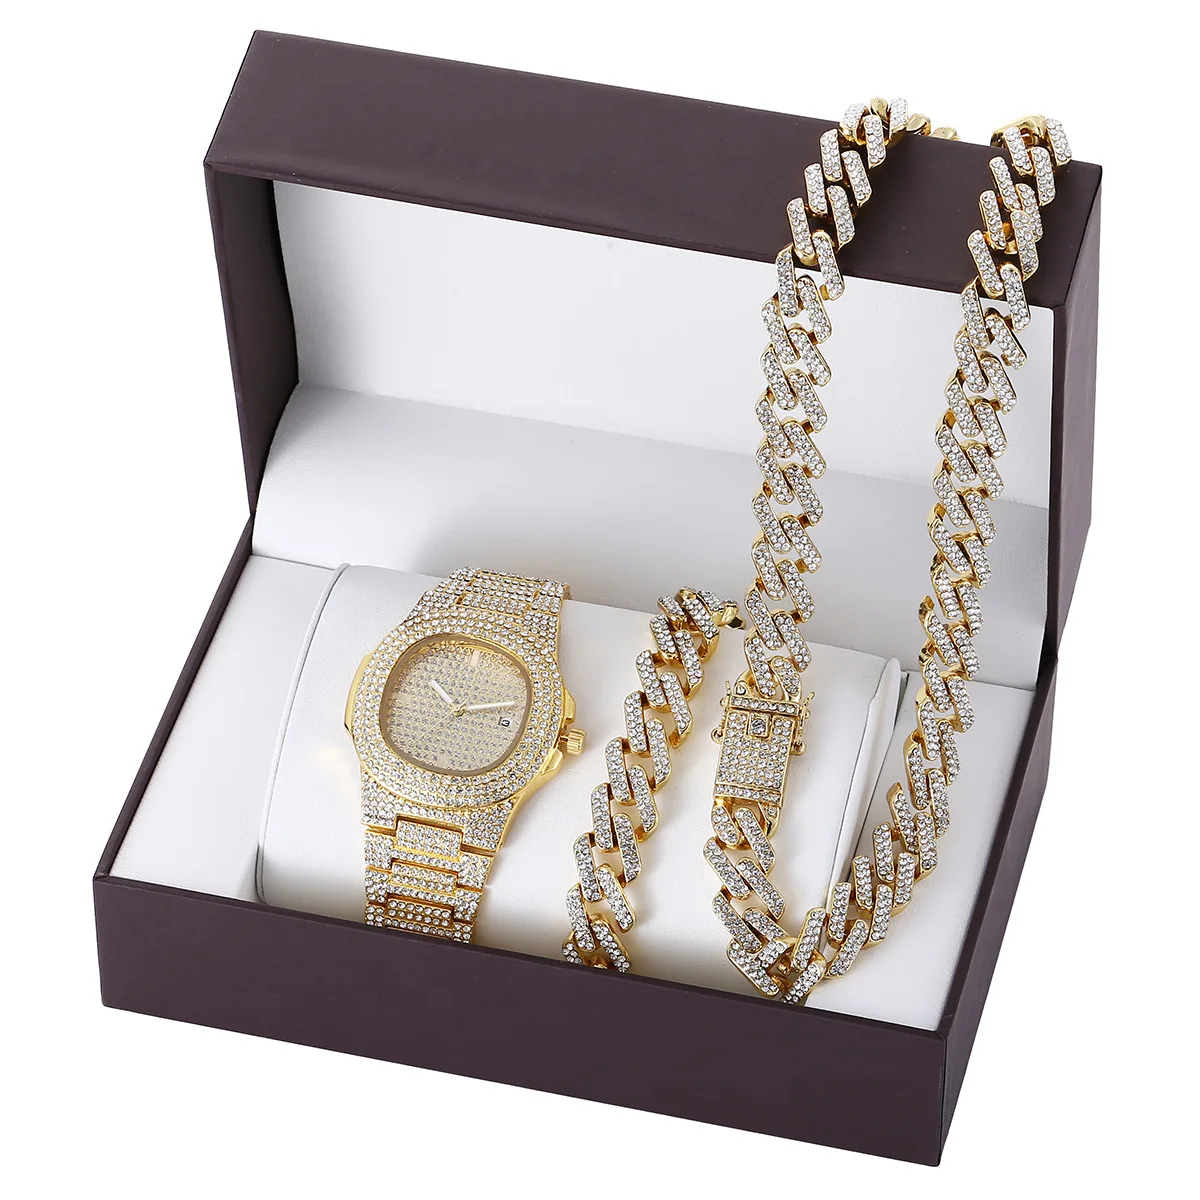 

Cuban Chain Watch Set Necklace Watch Bracelet Hip Hop Gold Iced Out Paved Rhinestones CZ Bling Rapper For Men Jewelry